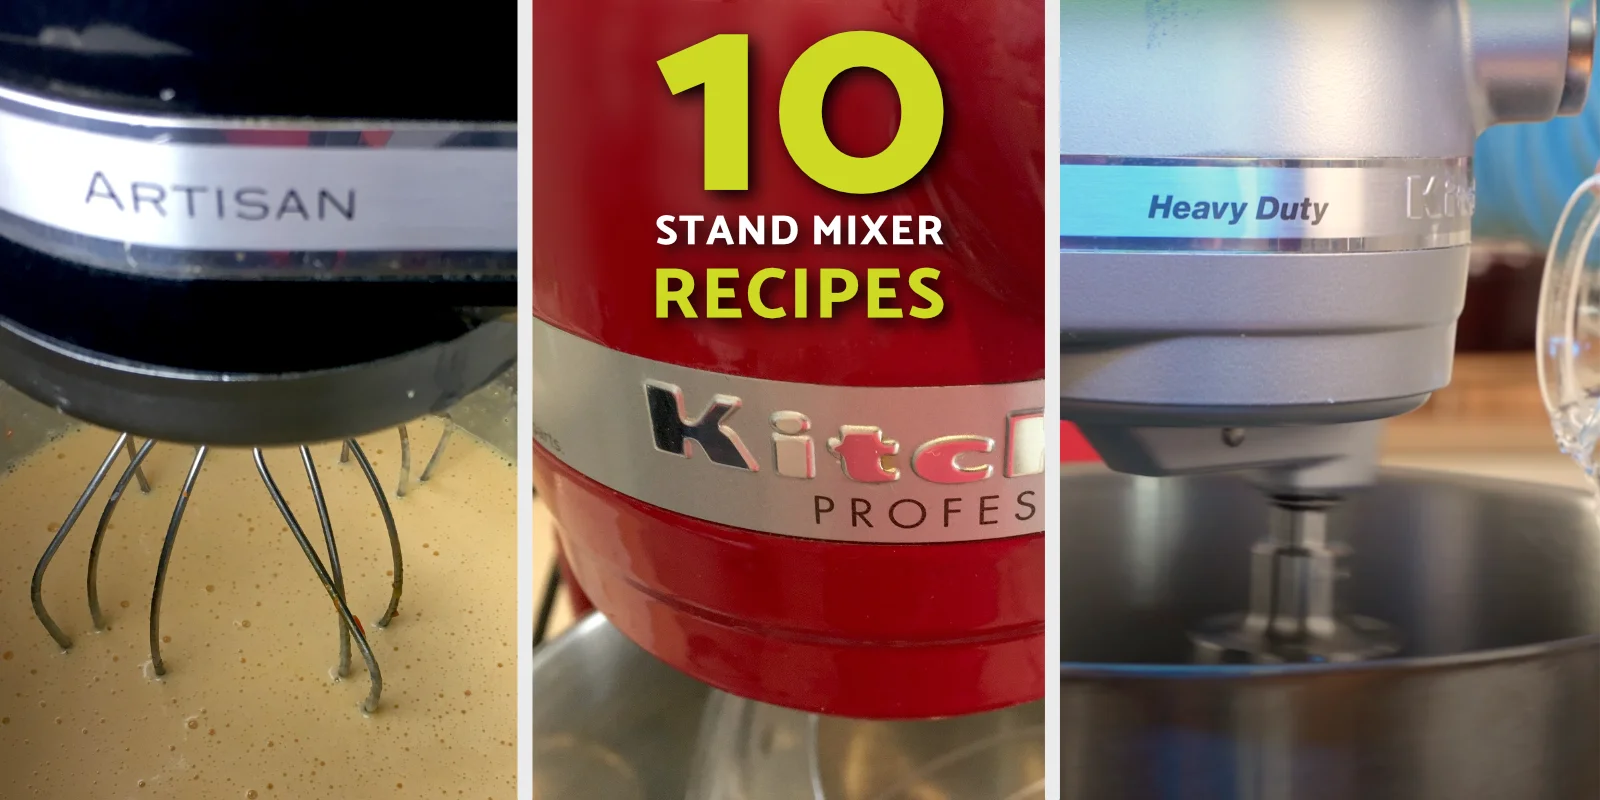 10 Stand Mixer Recipes to Master with your KitchenAid